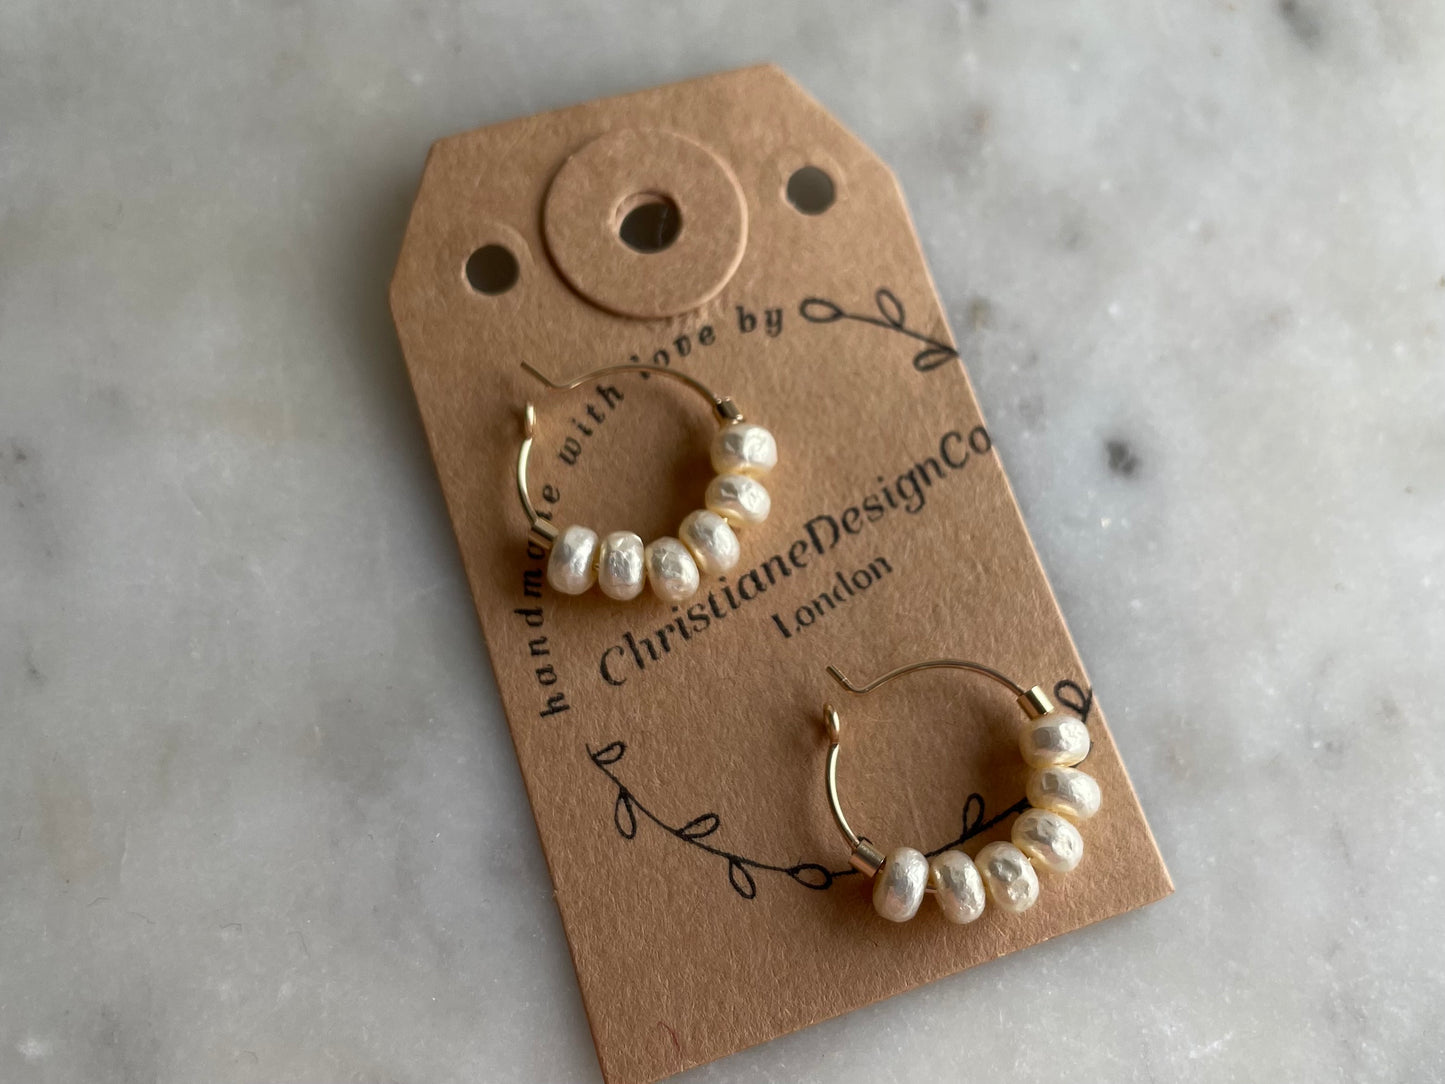 Mini Gold Filled Hoops Earrings with Pearl Style Glass Beads